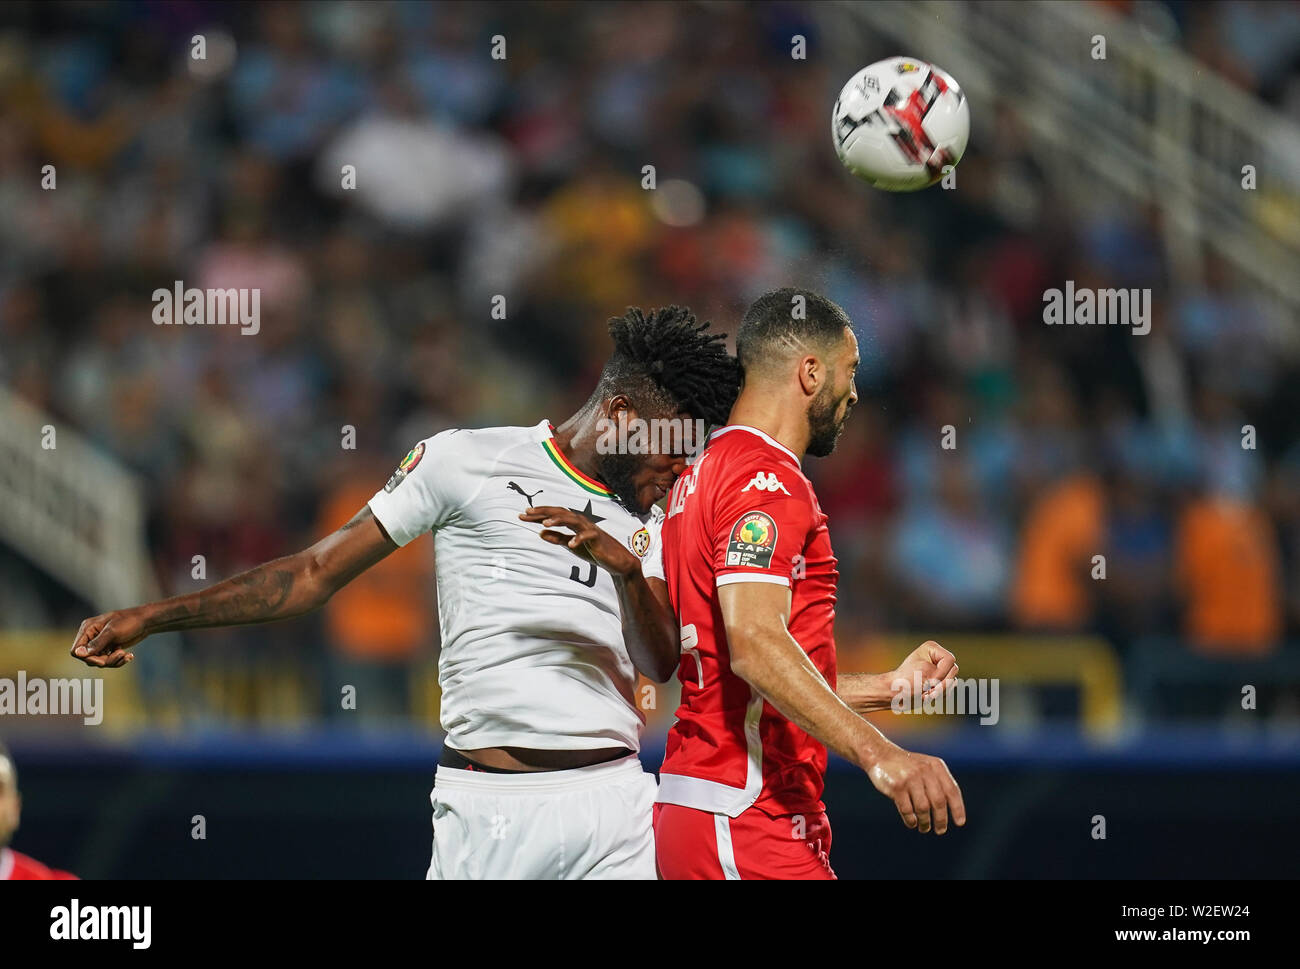 FRANCE OUT July 8, 2019: Thomas Teye Partey of Ghana and Yassine Meriah of Tunisia challenging for the ball during the 2019 African Cup of Nations match between Ghana and Tunisia at the Ismailia Stadium in Ismailia, Egypt. Ulrik Pedersen/CSM. Stock Photo